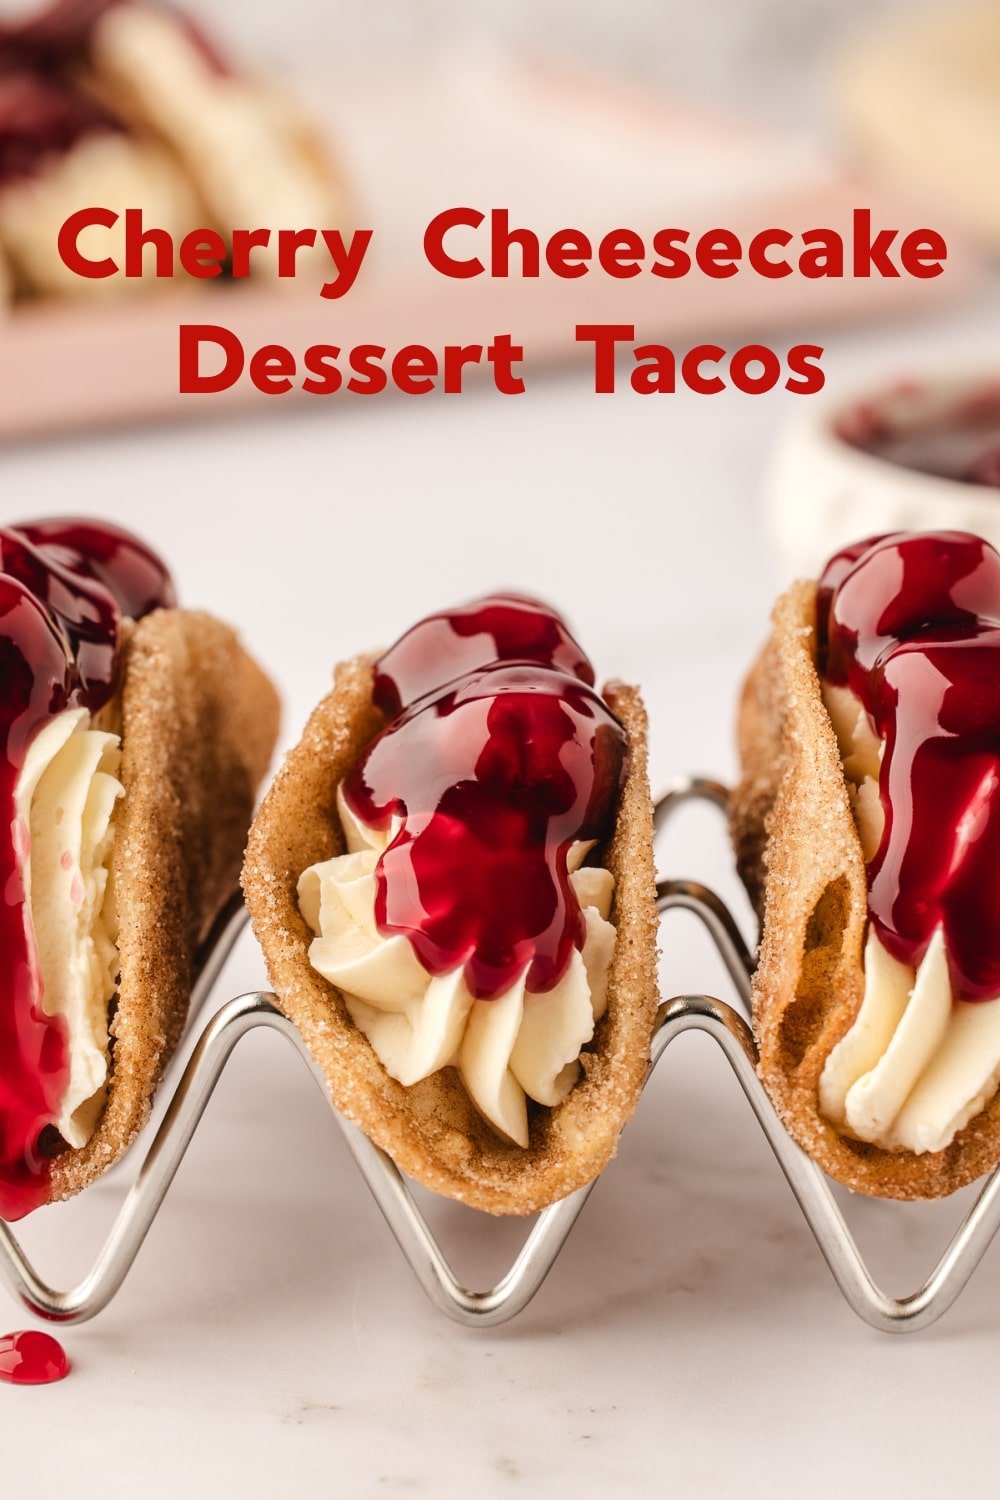 Taco Tuesday just got a sweet treat makeover! Cinnamon-crisp tortillas are filled with an irresistibly smooth and creamy vanilla cheesecake mixture and topped with cherry pie filling. You'll want to eat these dessert tacos every day of the week! via @cmpollak1